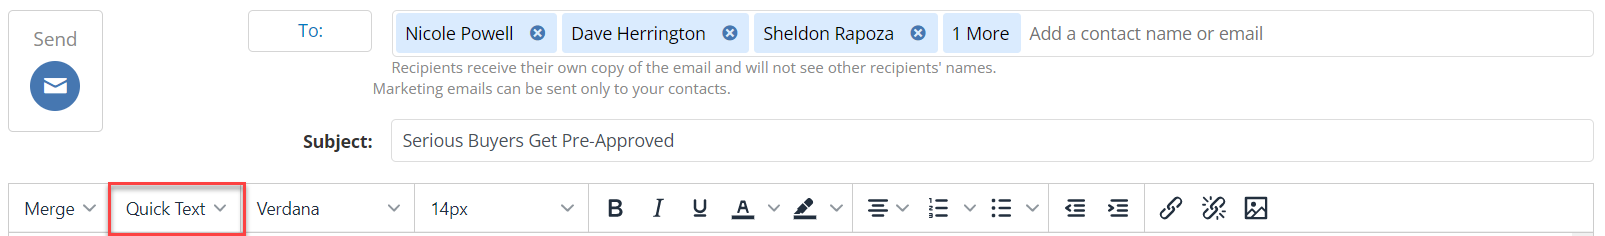 Screenshot showing the option to add a Quick Text to an email